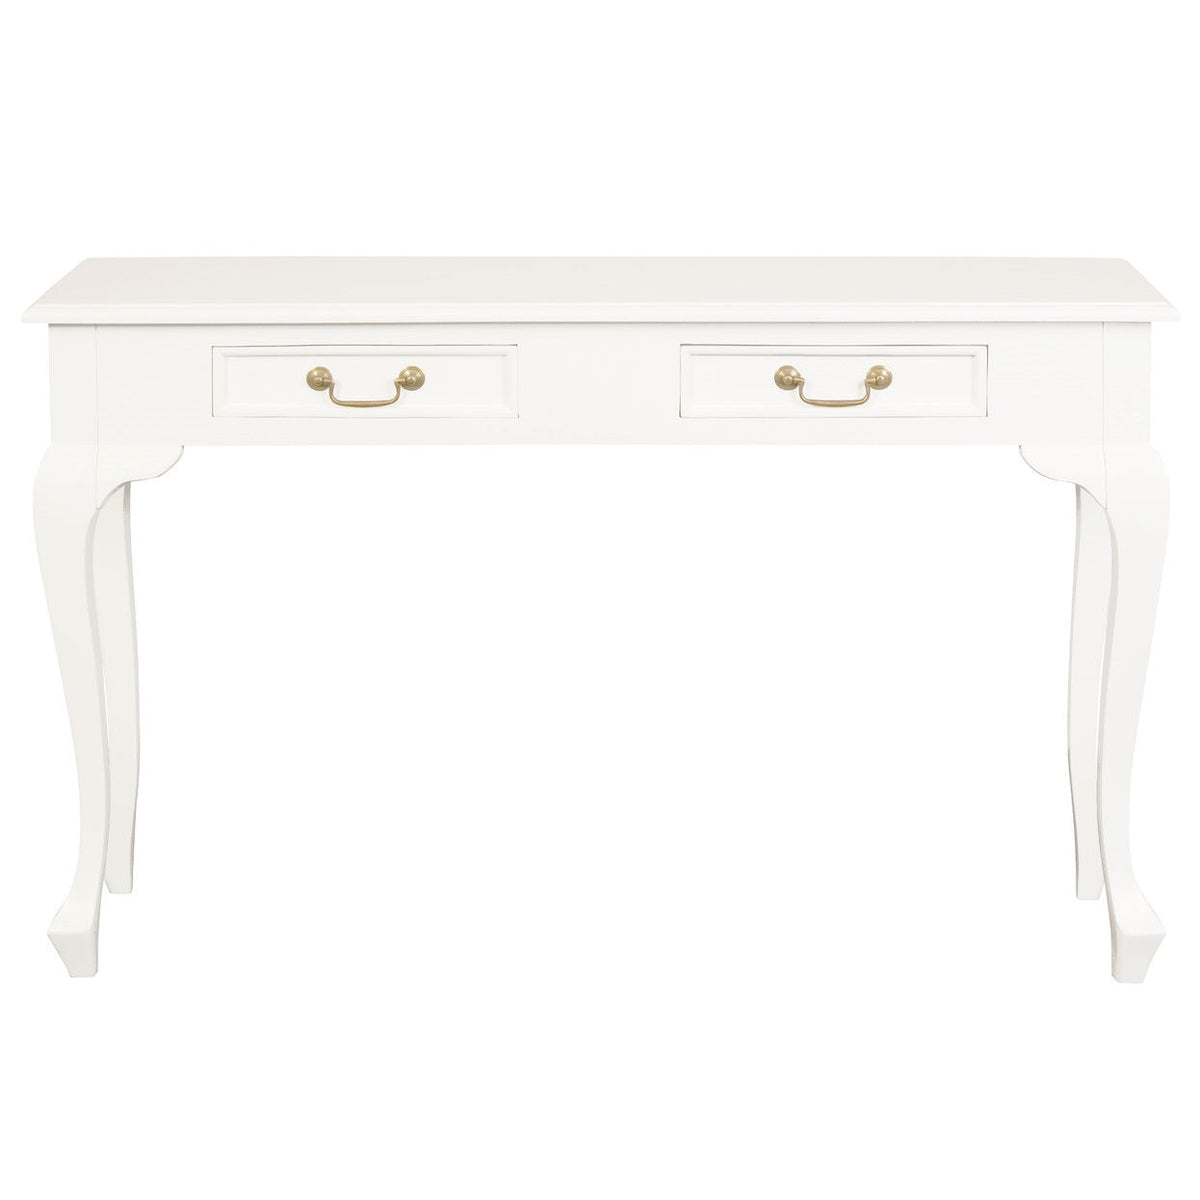 Queen Ann Console Table in White - 2 Drawer - Notbrand